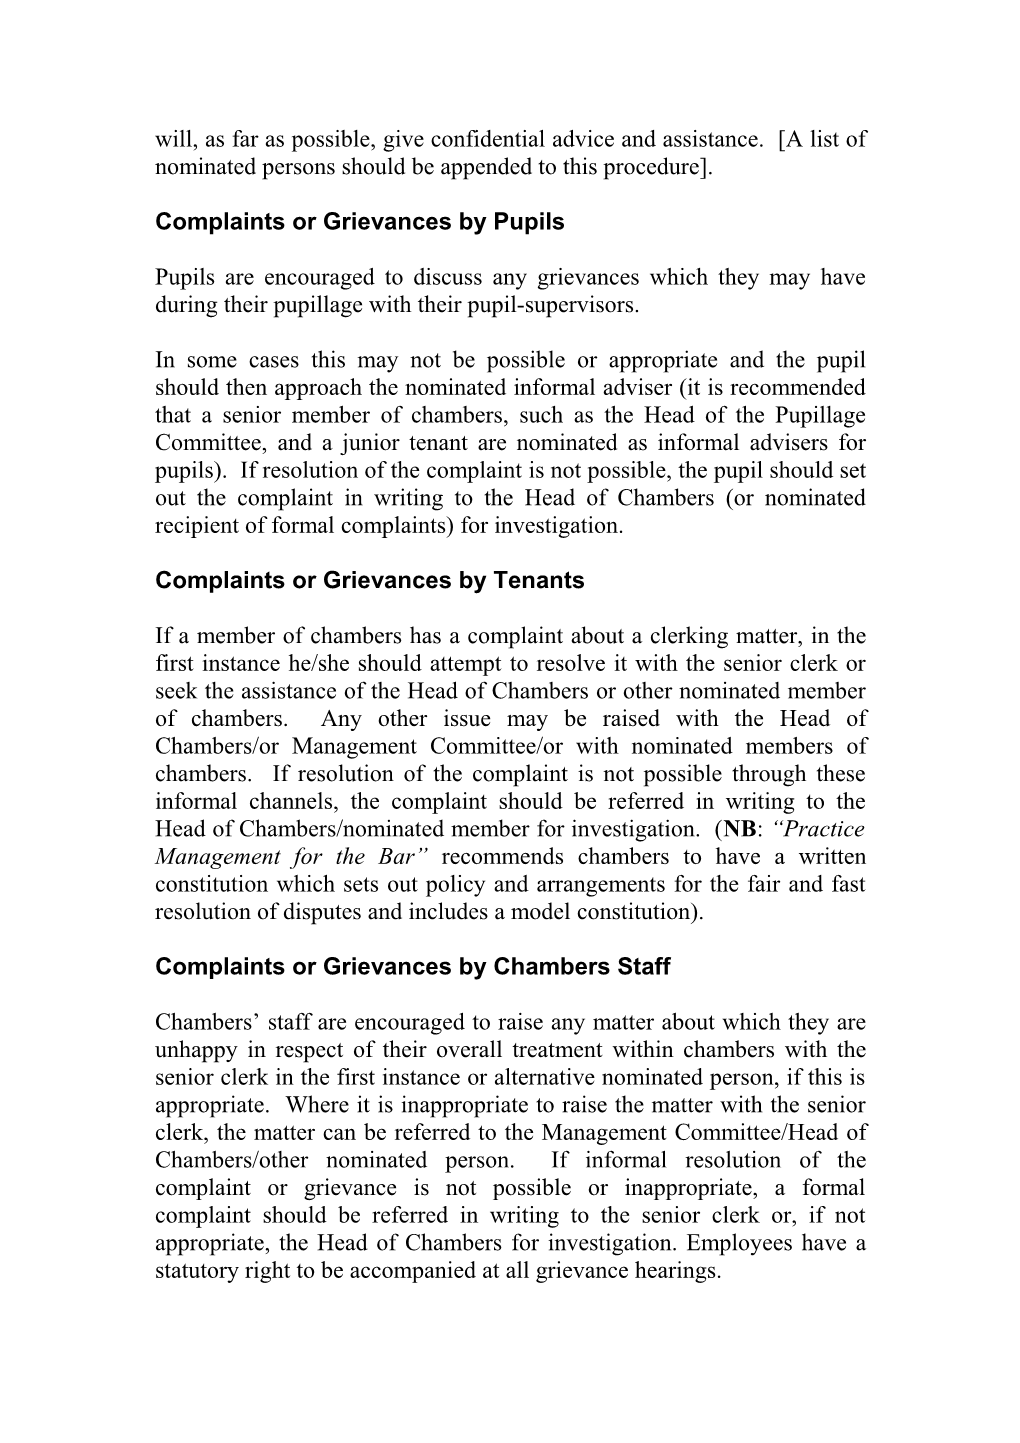 Model Complaints Or Grievance Procedures for Chambers